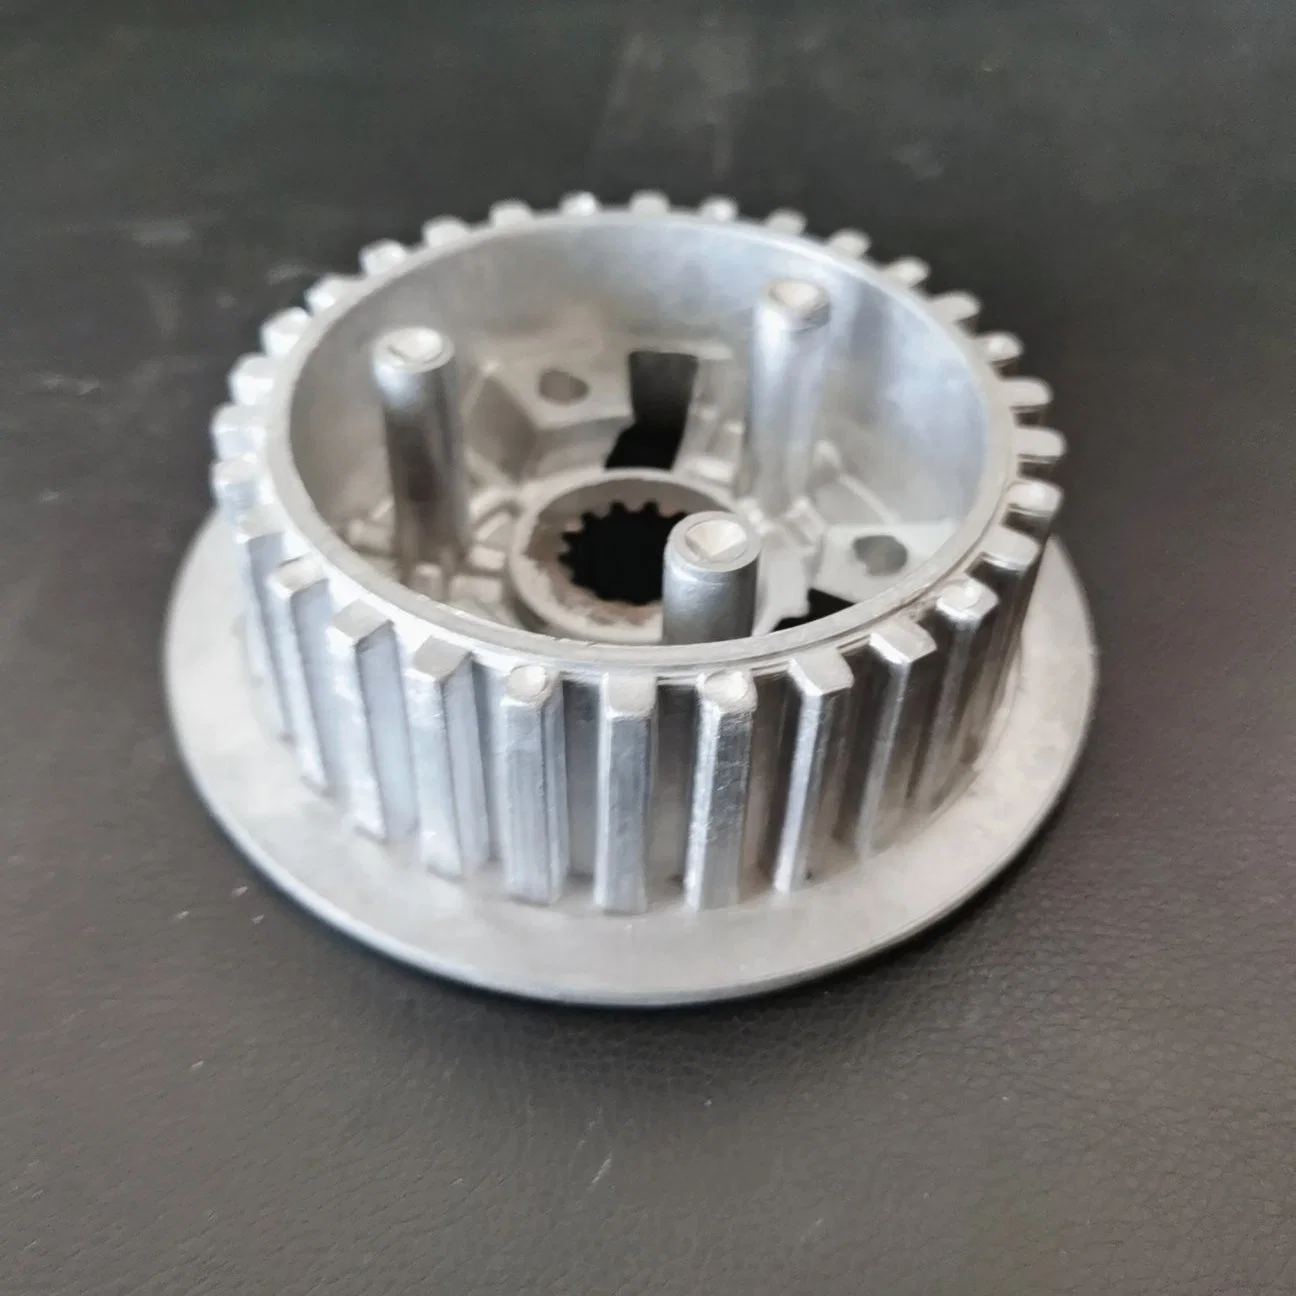 Aluminum Alloy High Pressure Die Casting with Precision CNC Machining for Motorcycle Clutch Part